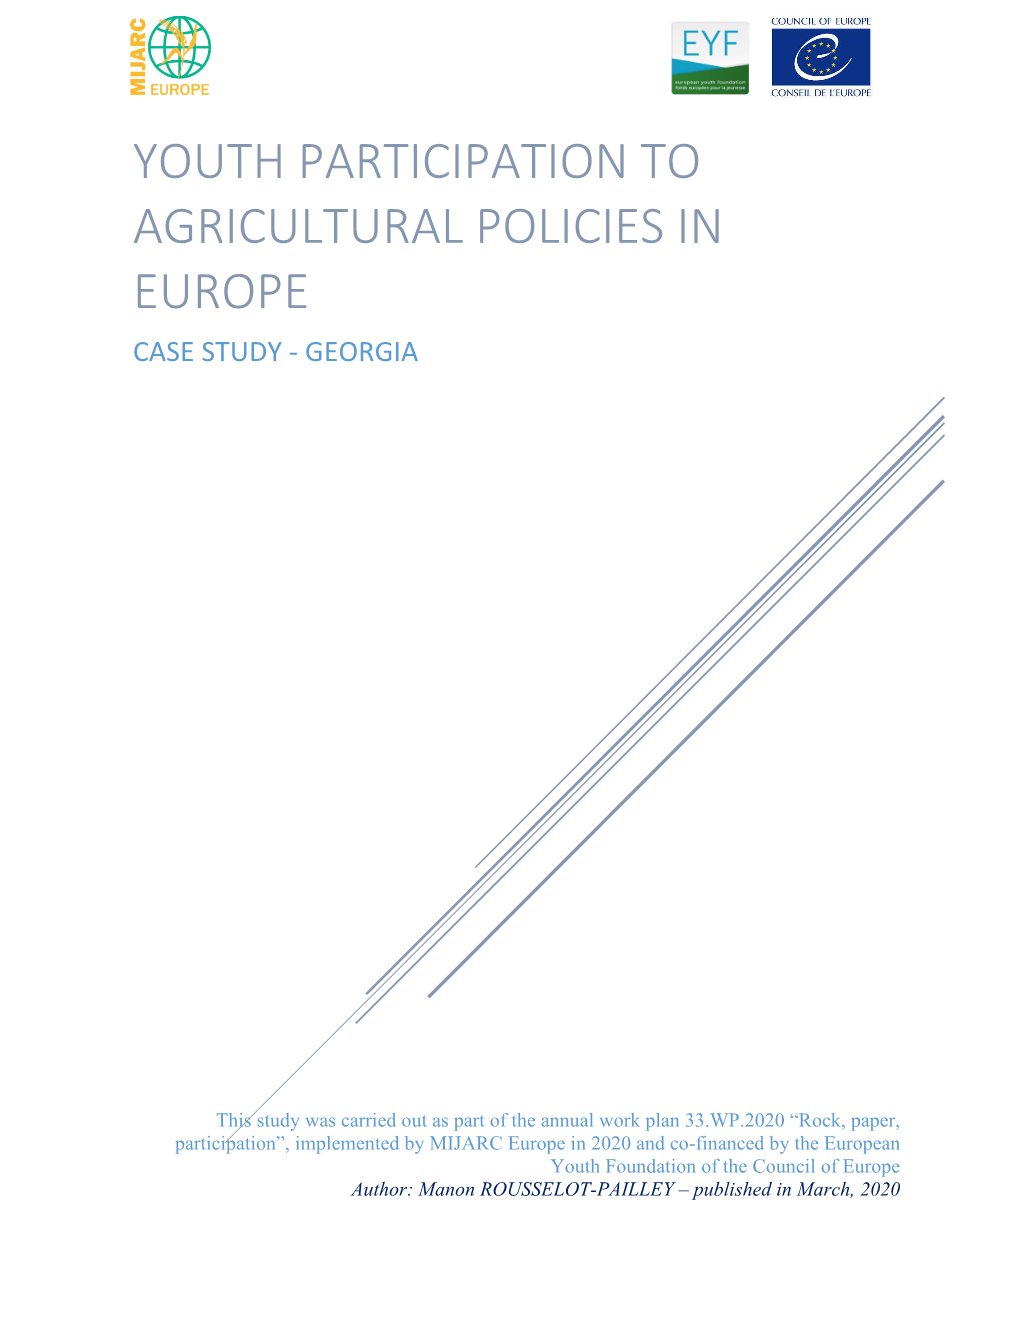 Youth Participation to Agricultural Policies in Europe